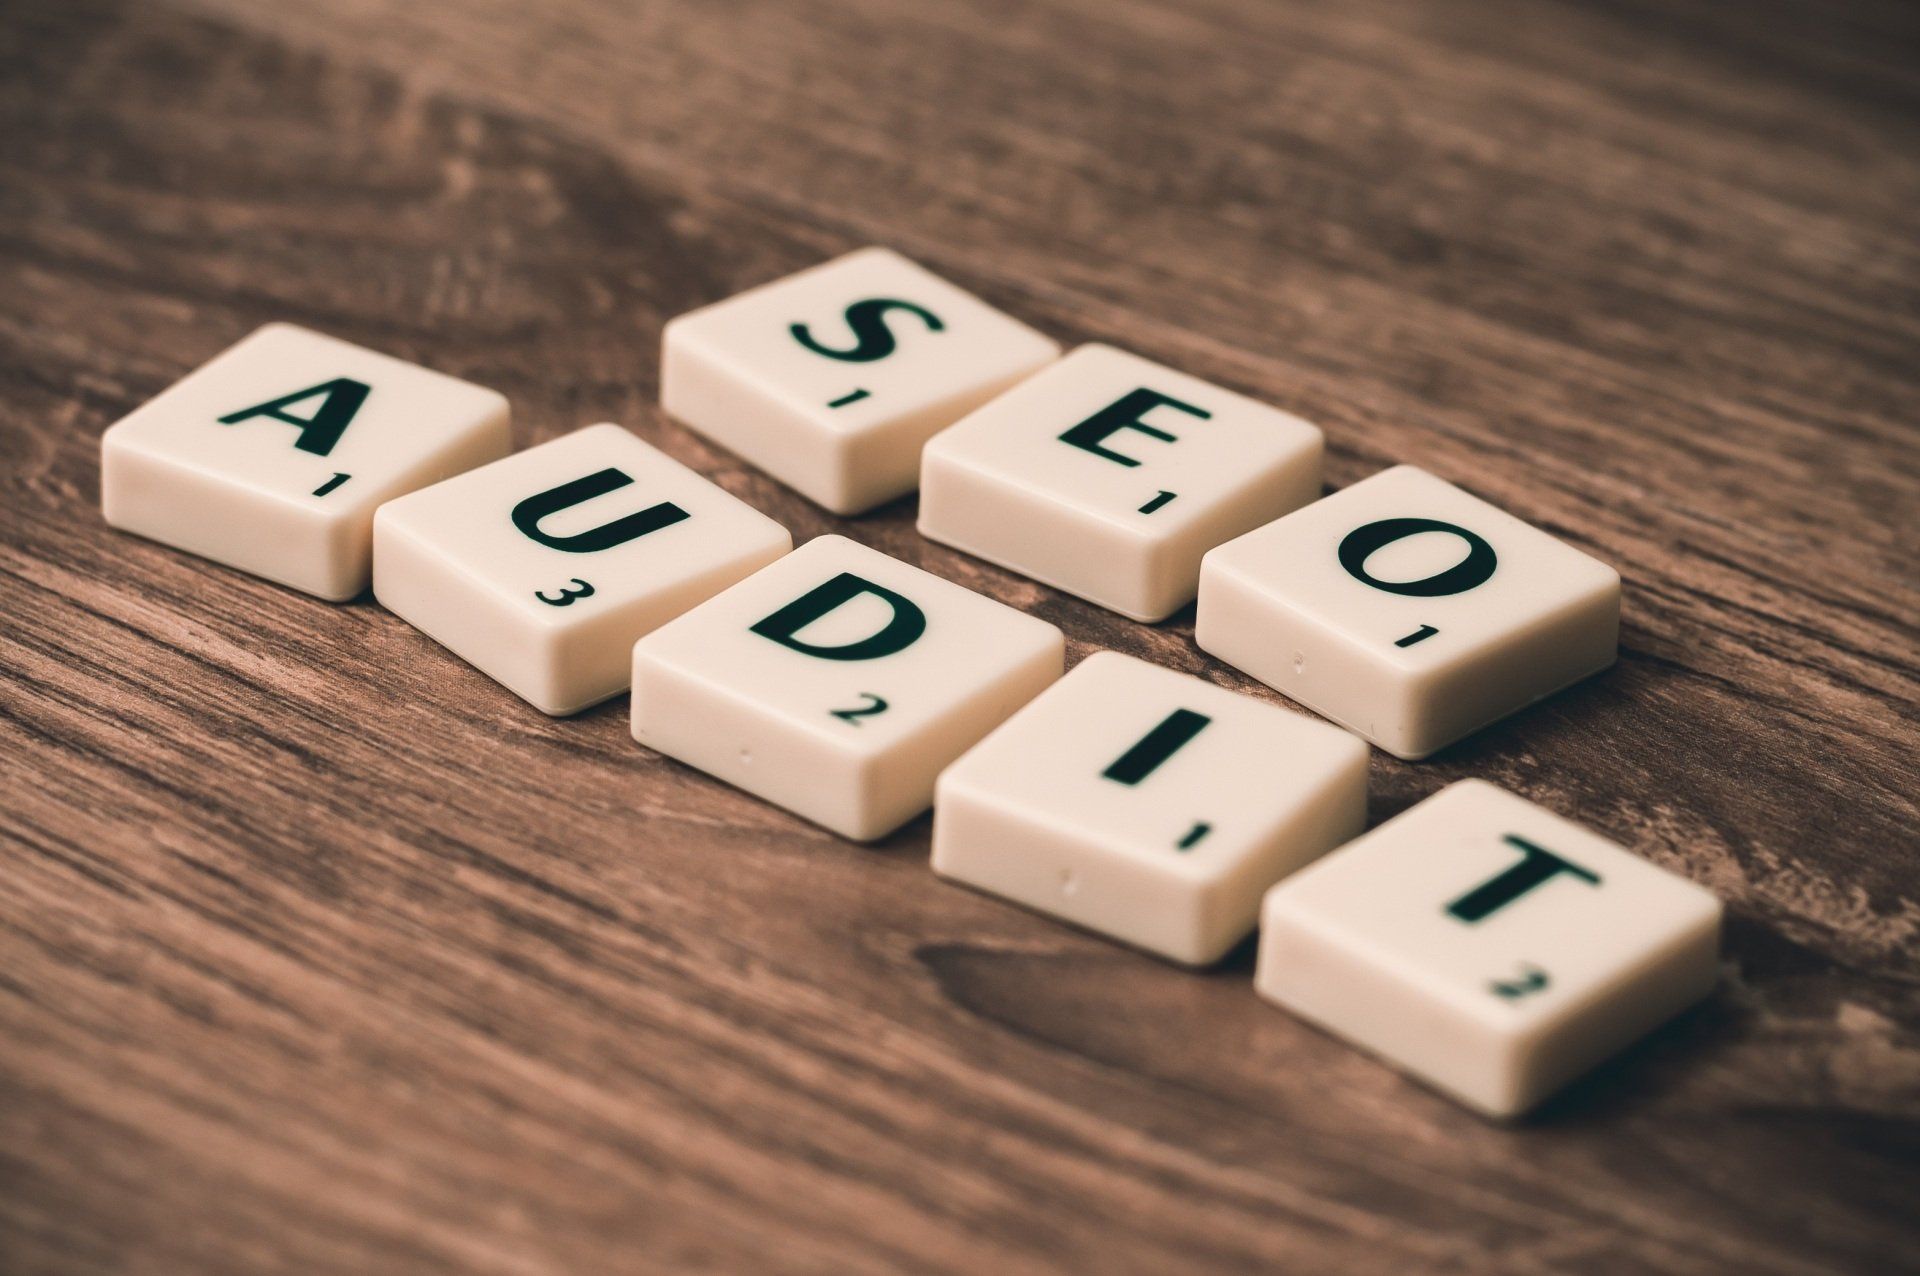 Scrabble tiles on a wooden table that spell out audit seo and audit